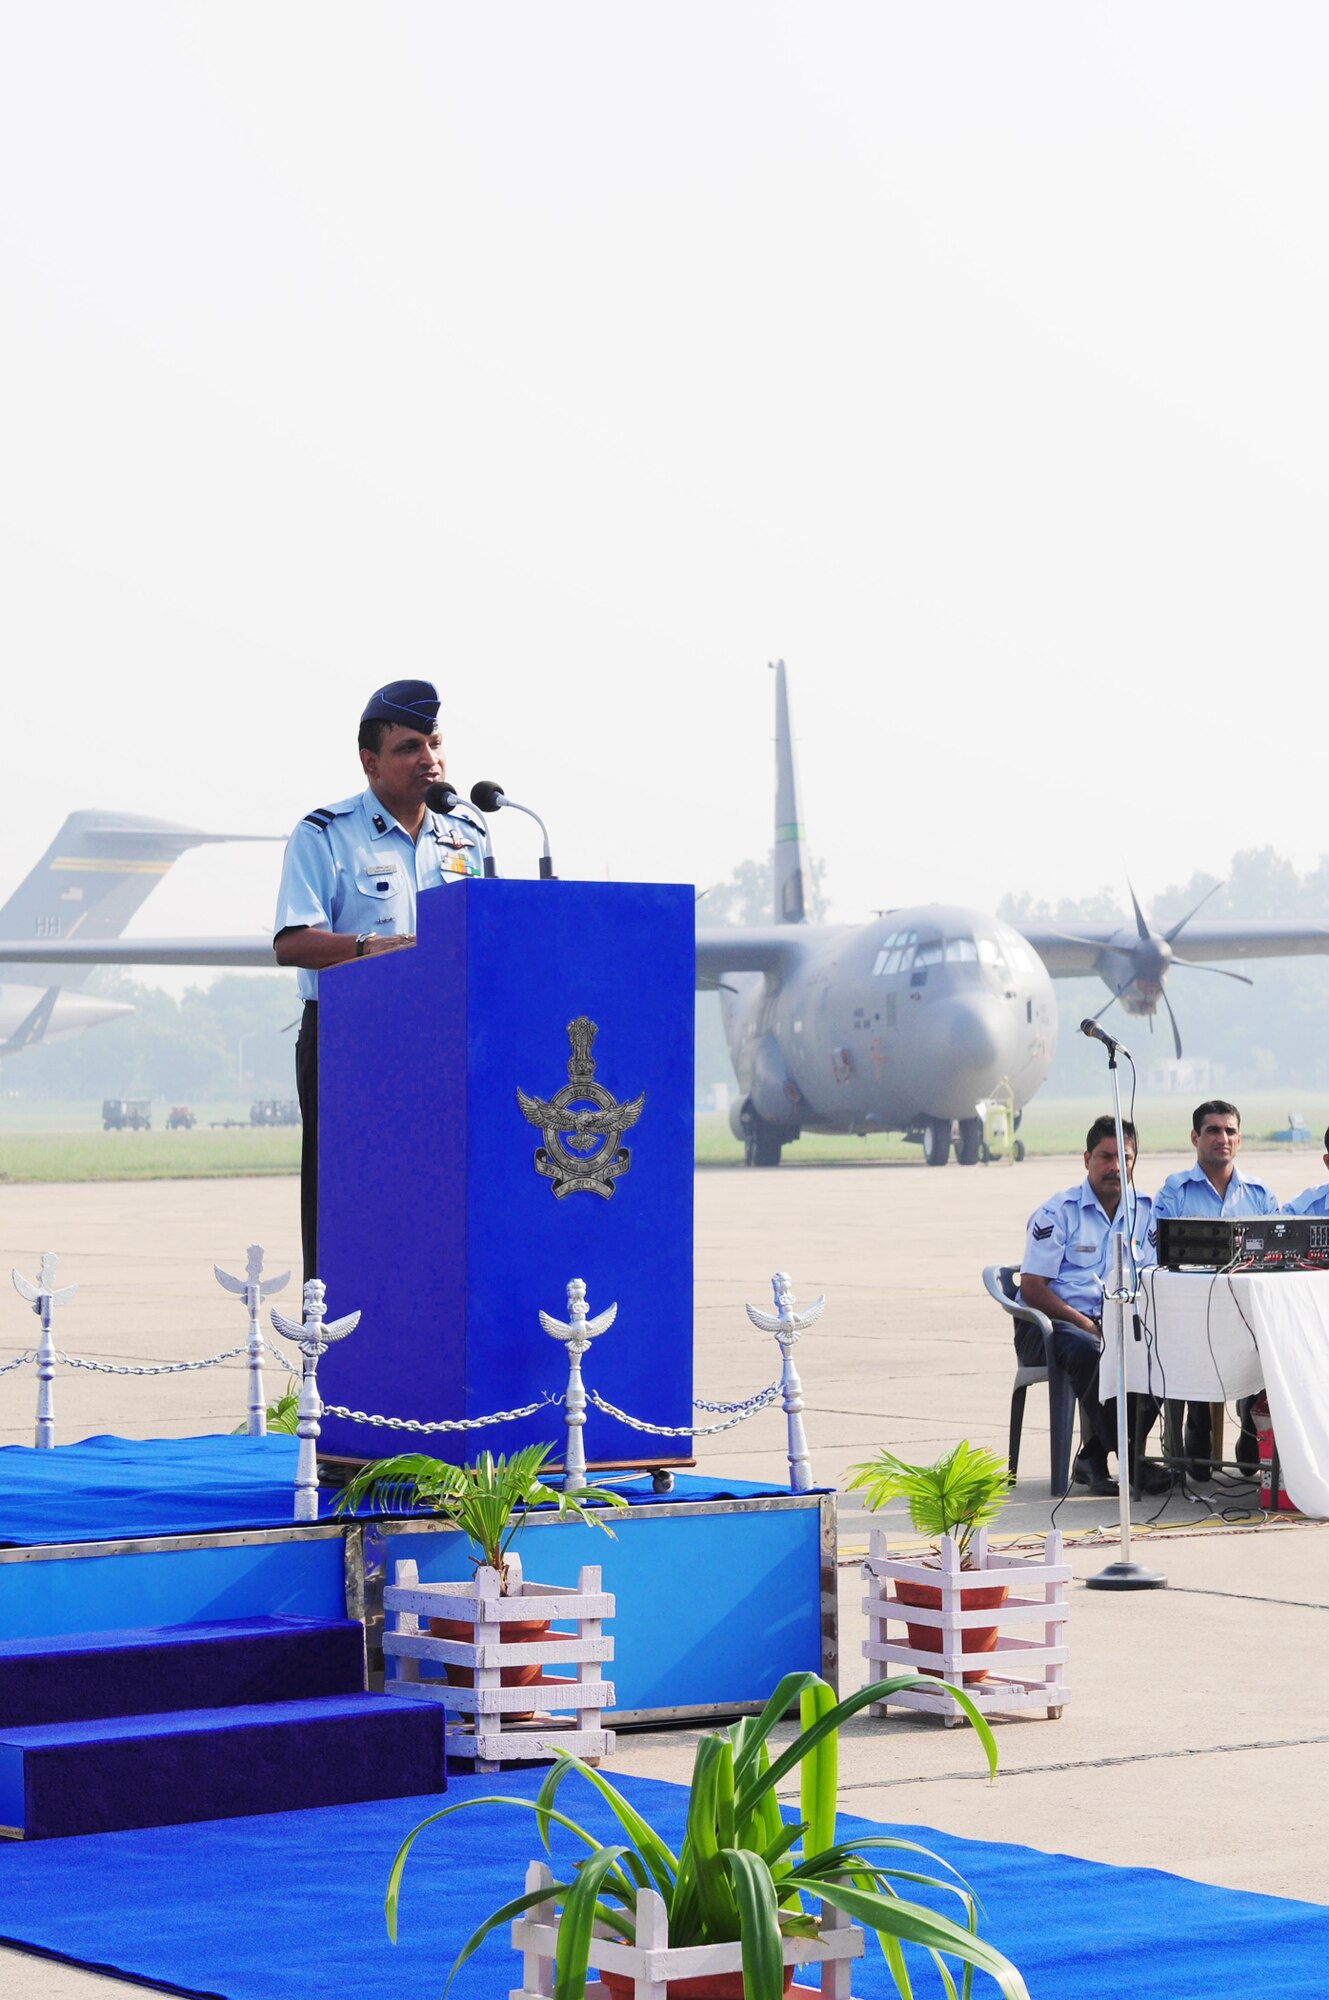 Air Commodore Shouvik Roy provides comments during the Cope India opening ceremony Oct. 19, 2009, at Air Force Station Agra, India. More than 150 U.S. Air Force and Army personnel are participating in Cope India, a United States and India airlift exercise that provides training for humanitarian assistance and disaster relief operations. Air Commodore Roy is from the Indian air force. (U.S. Air Force photo/Capt. Genieve David)